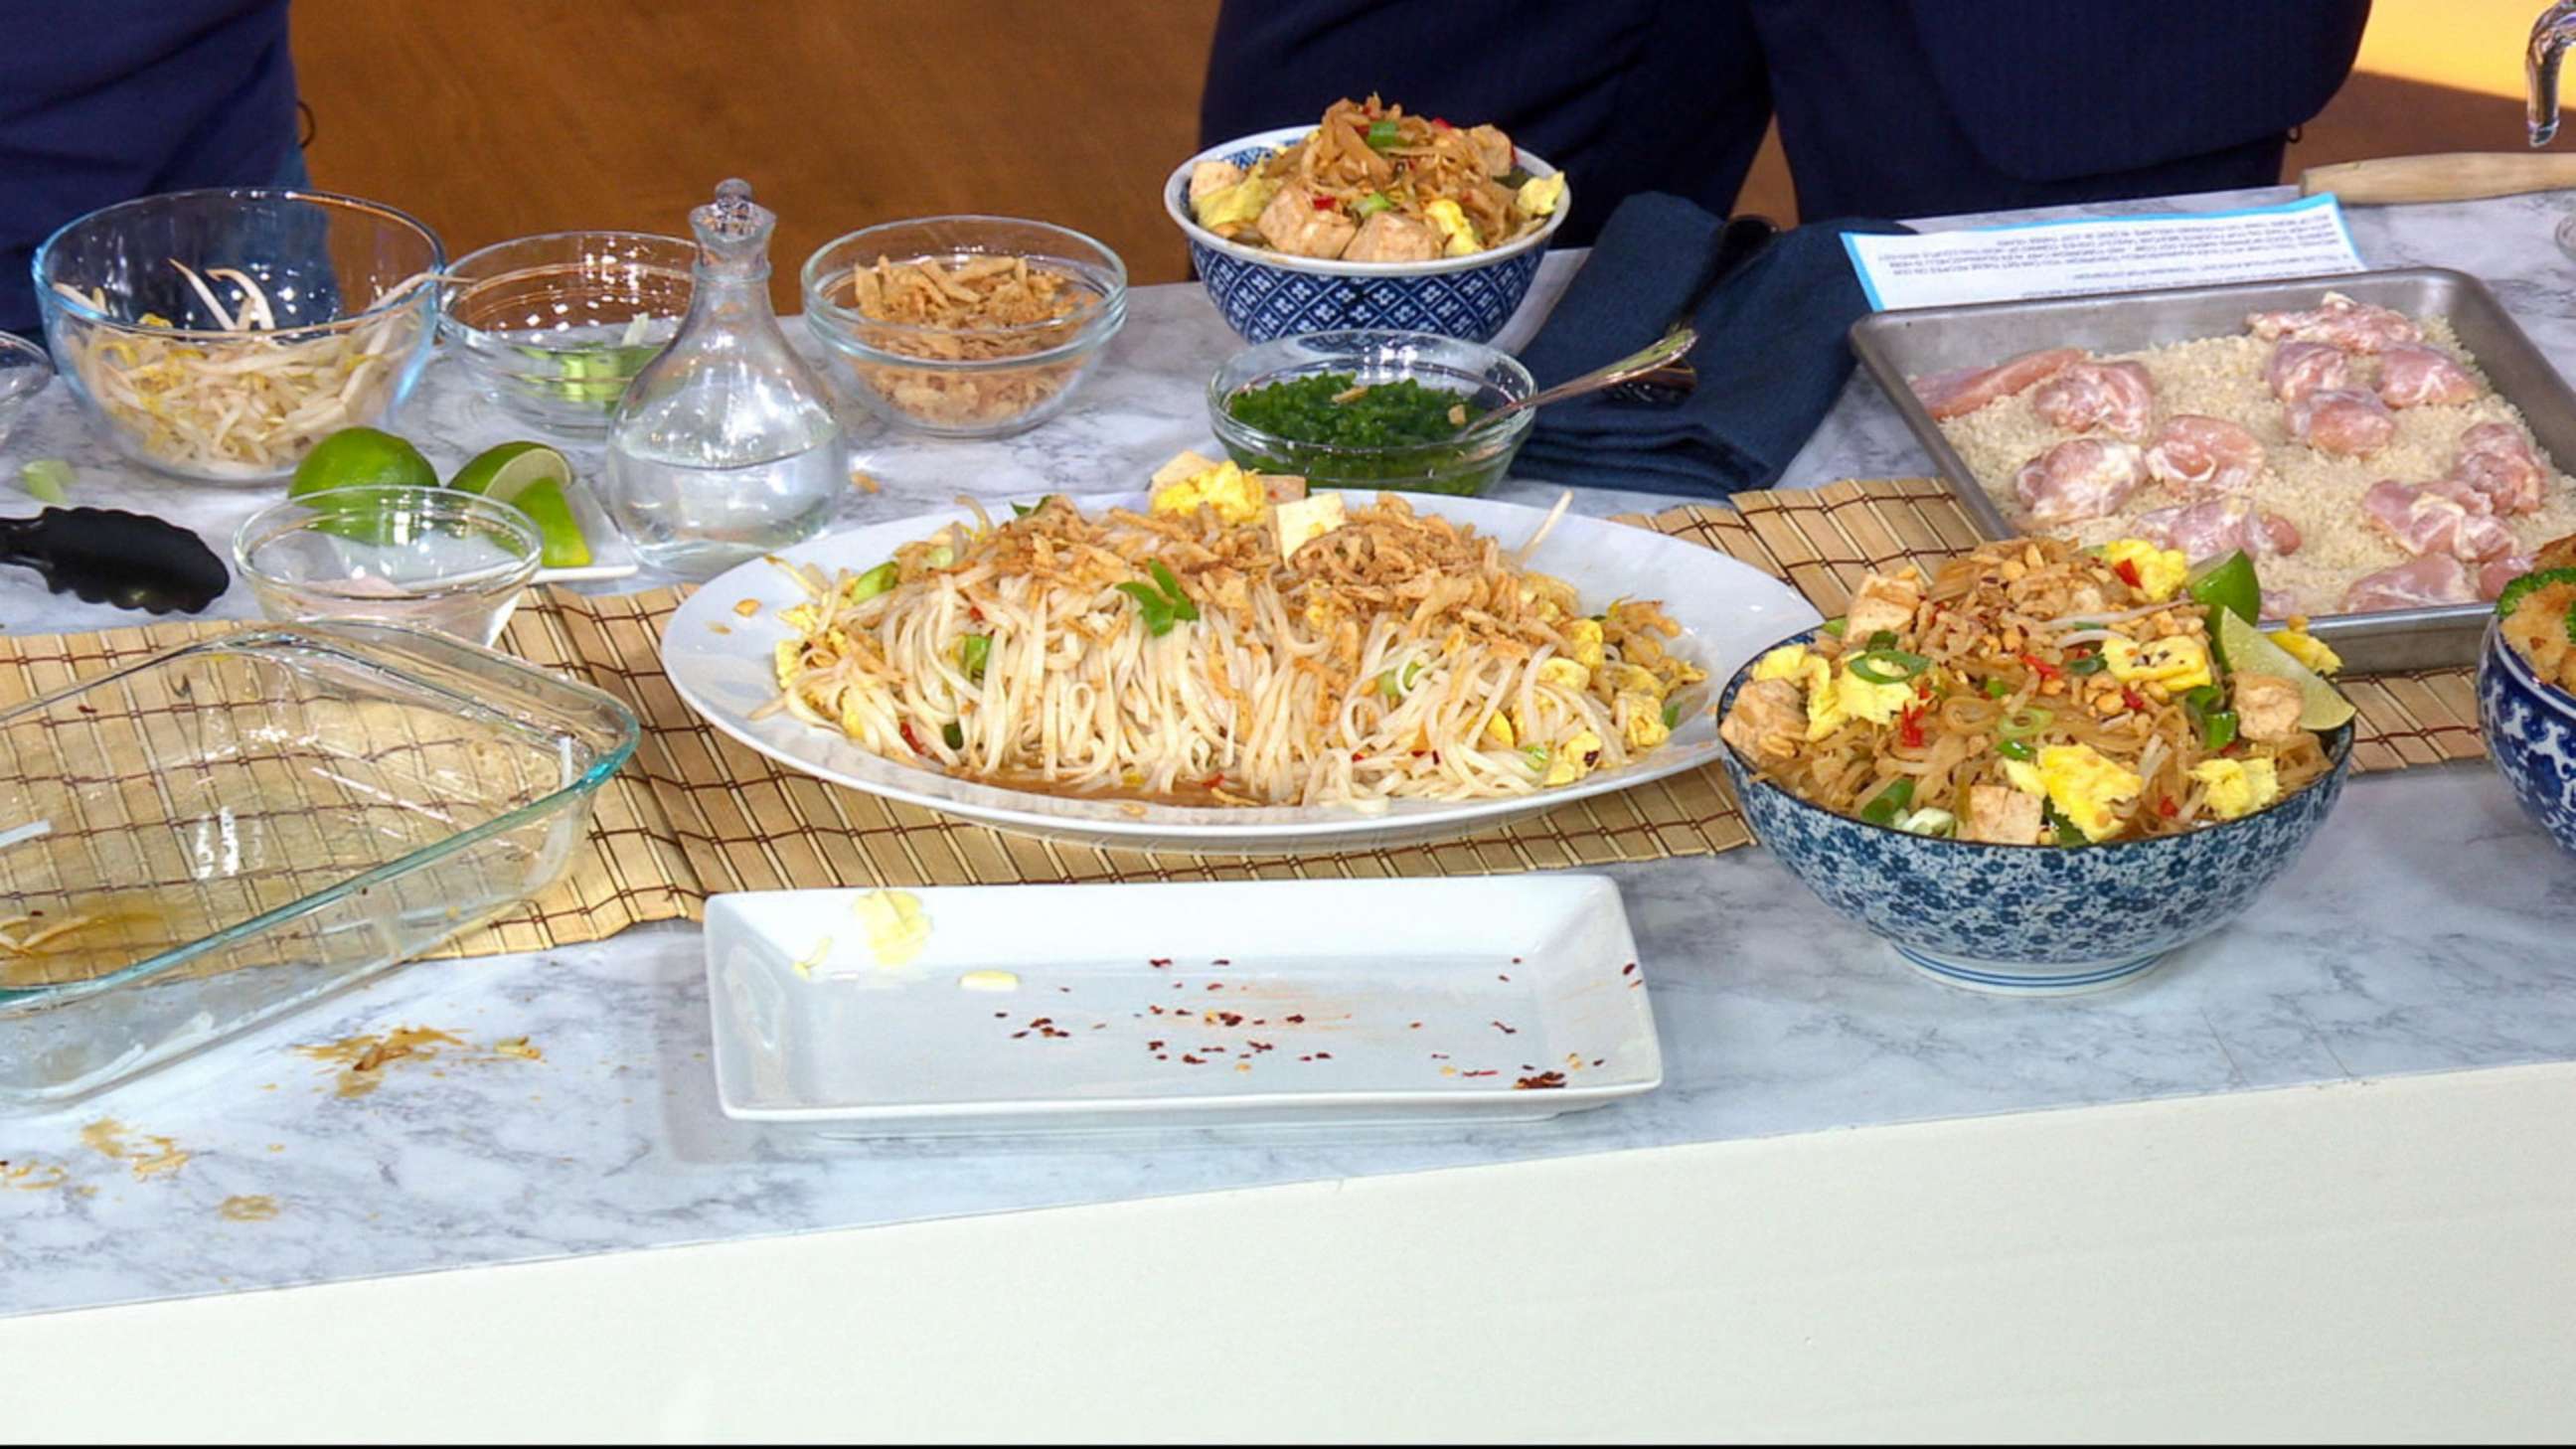 PHOTO: Chef and restaurateur Richard Blais shares his takeout fakeout recipes with "GMA."